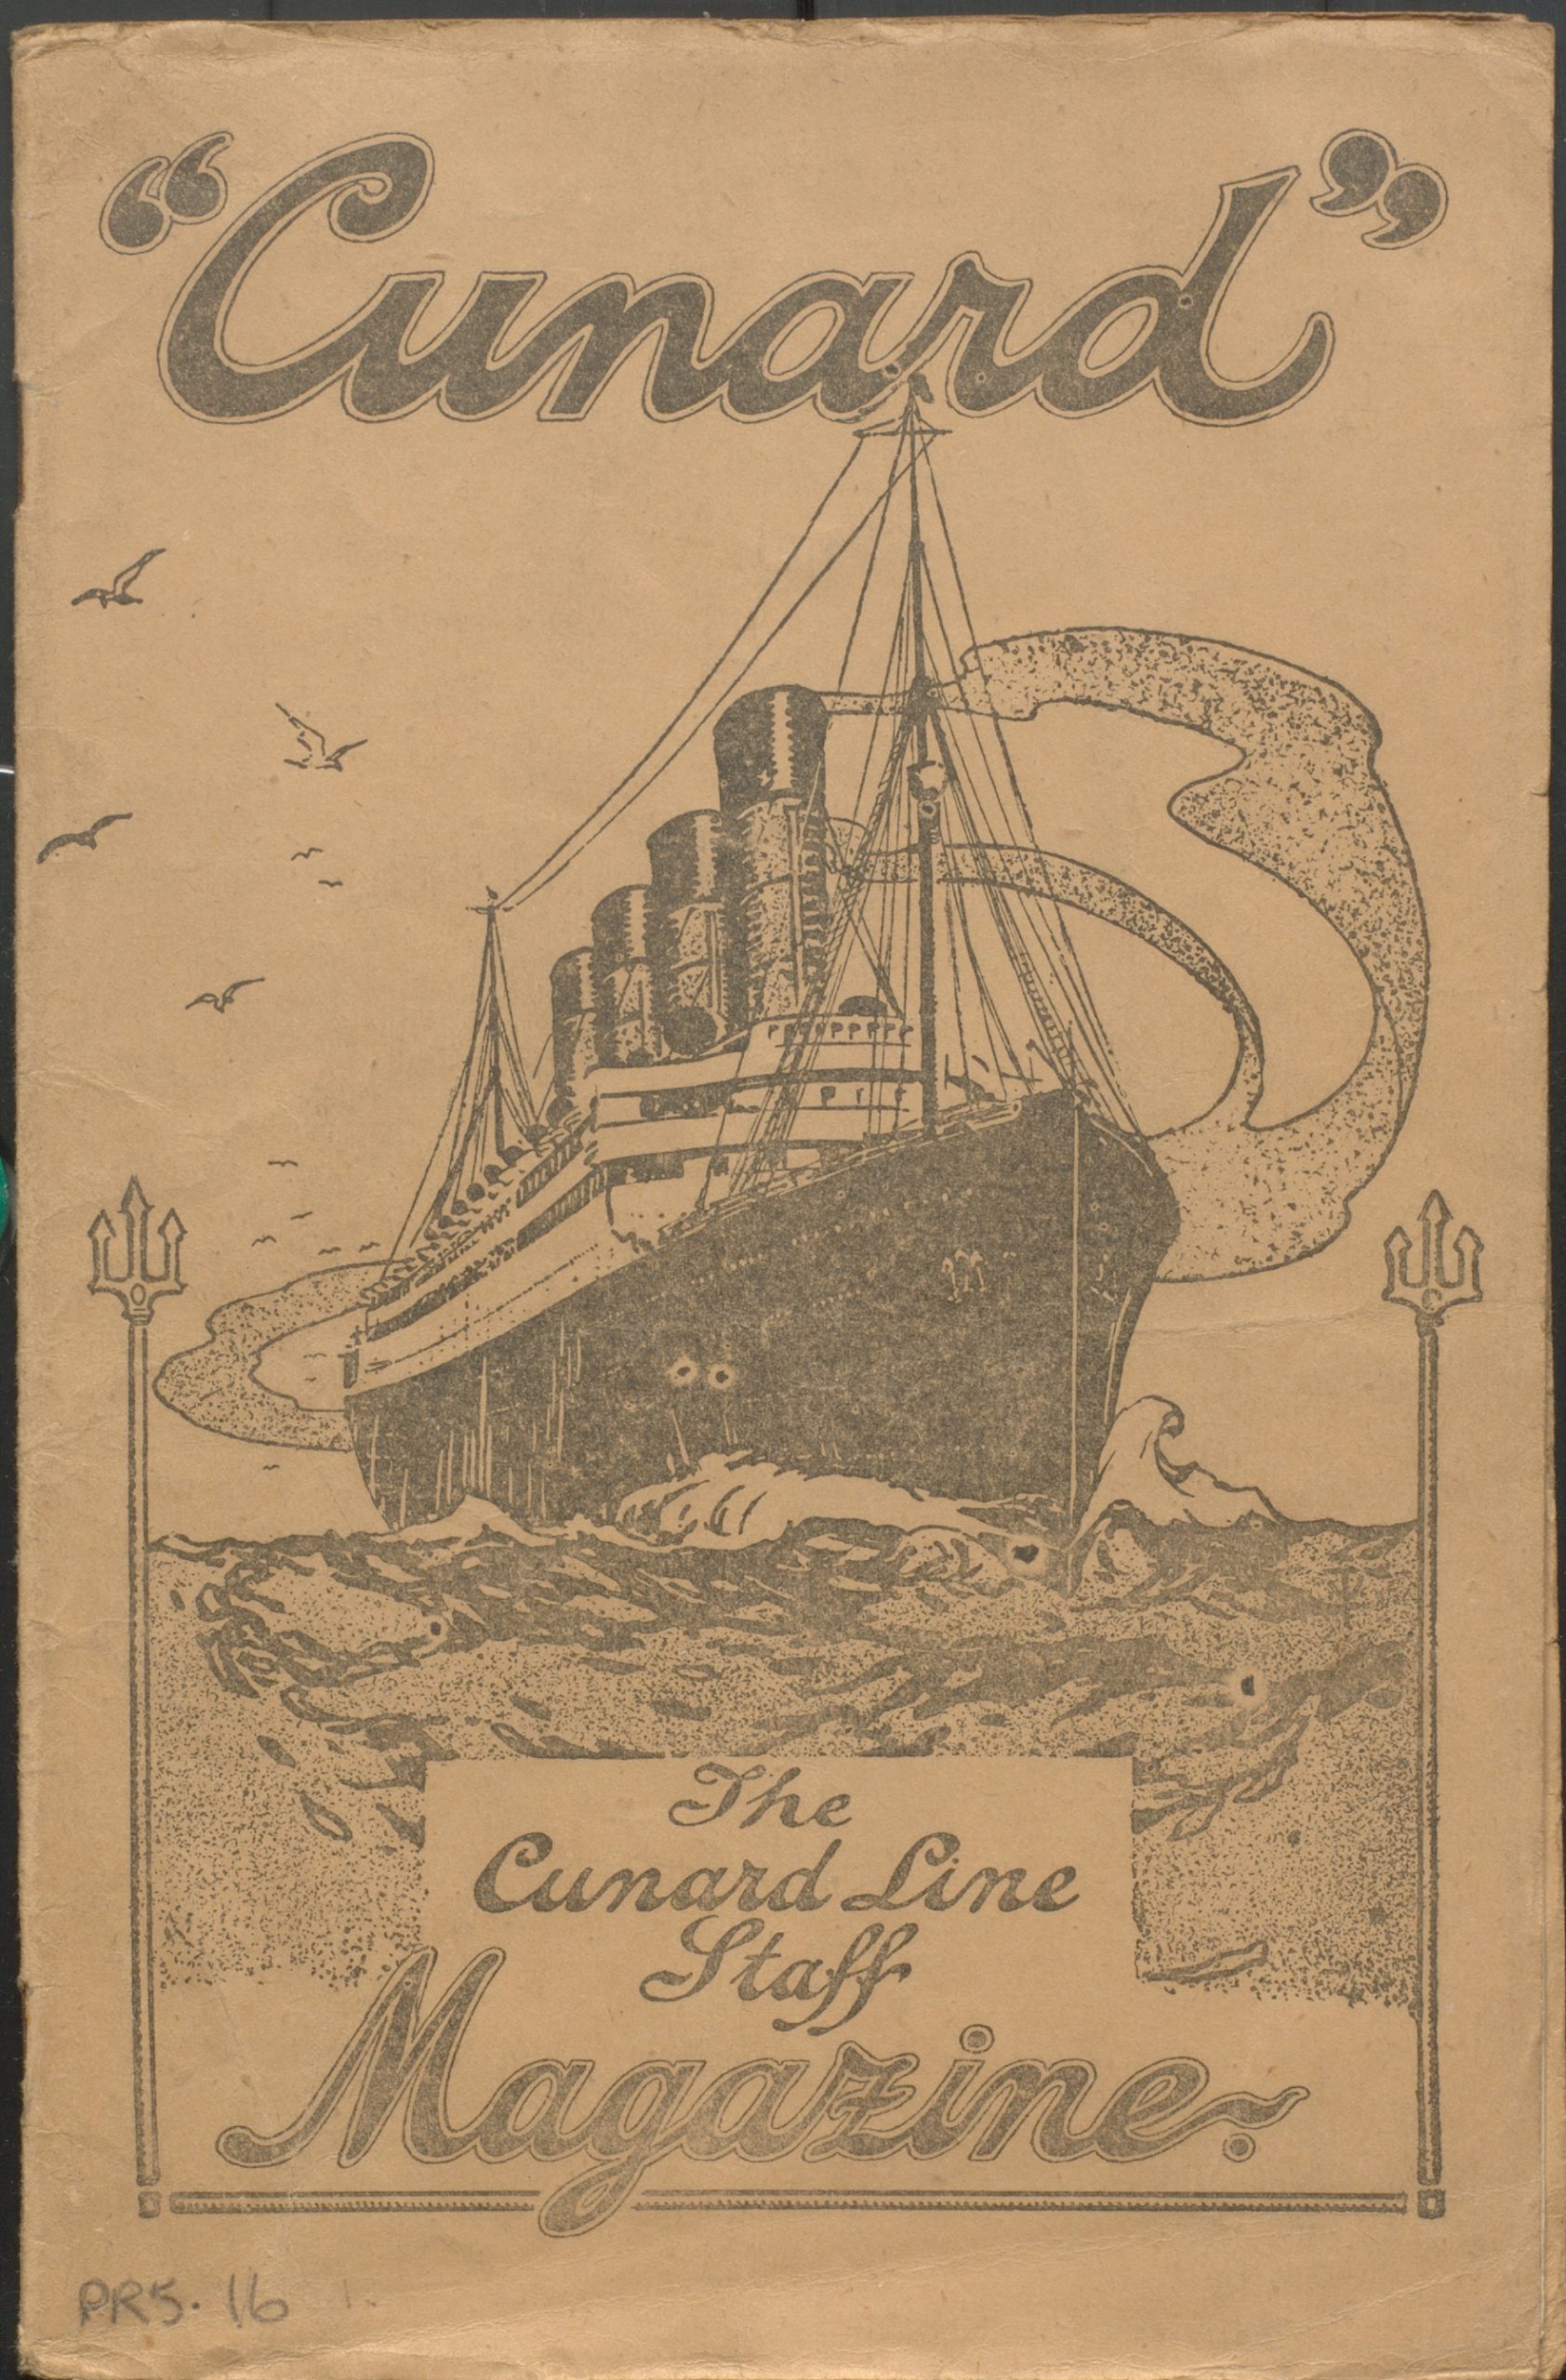 Cunard magazine front cover